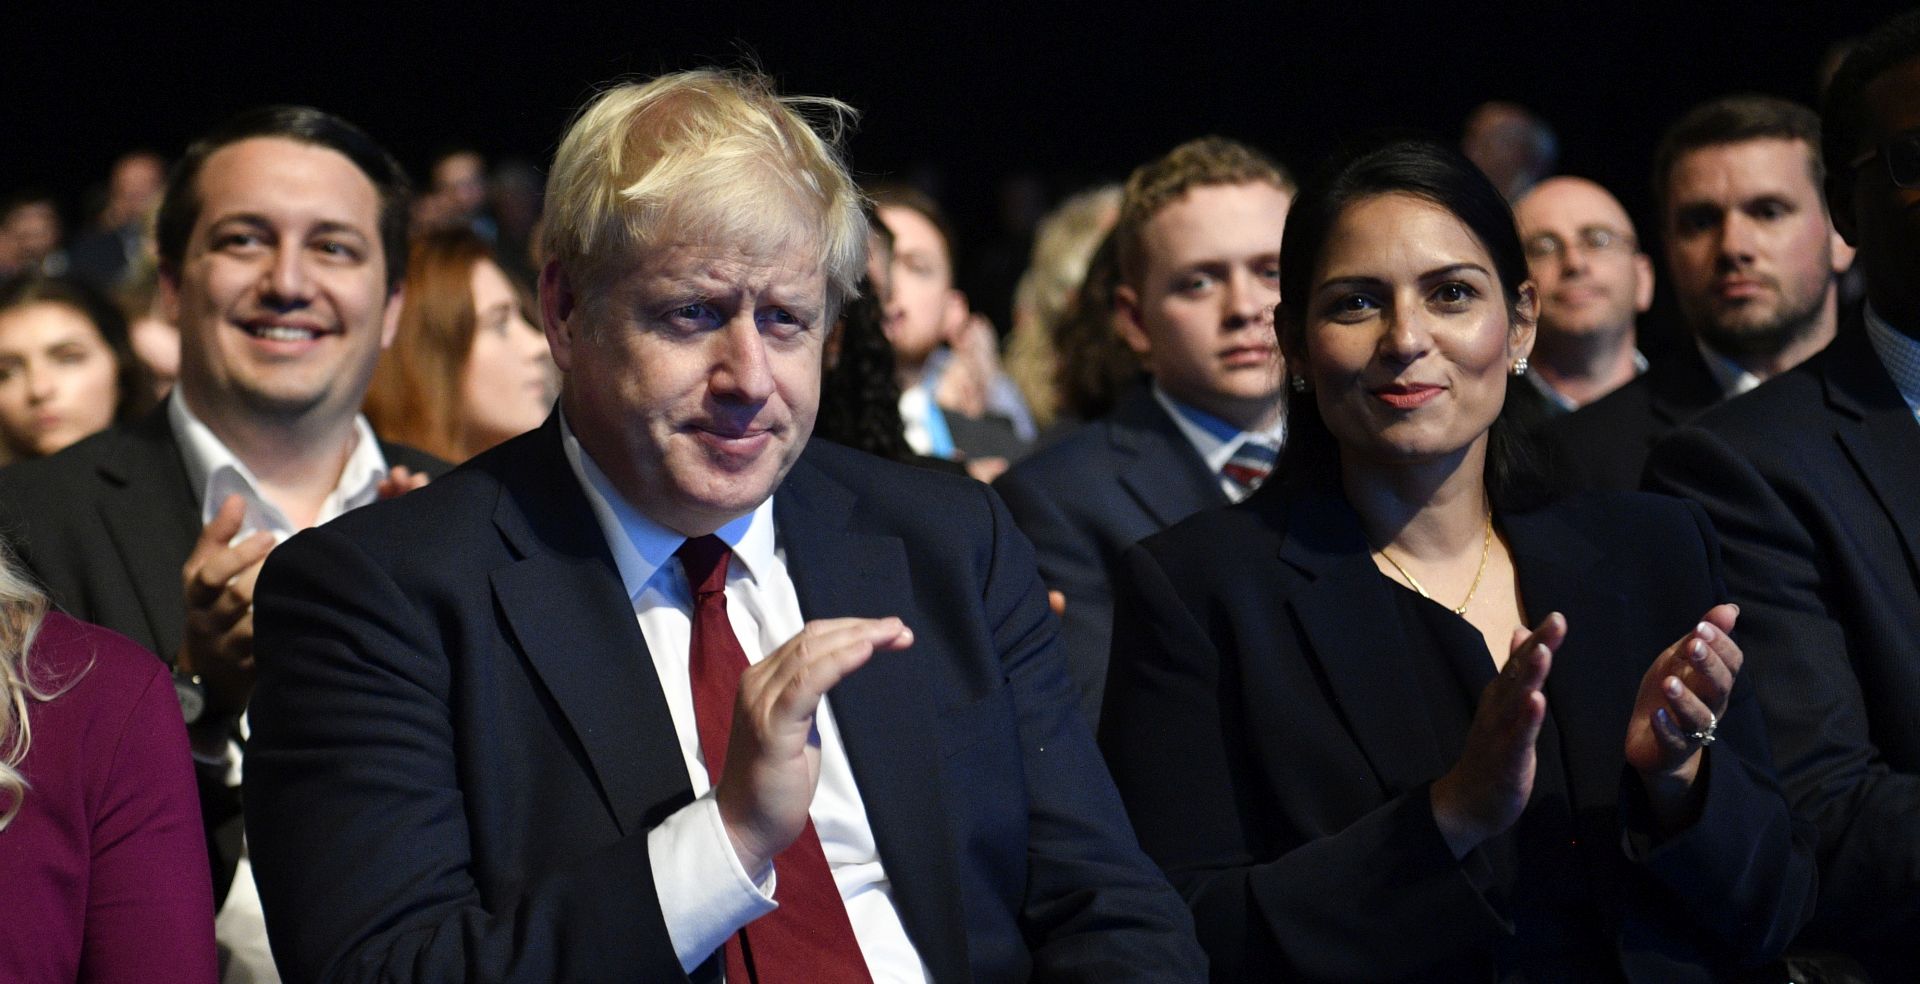 epa07882591 Britain's Prime Minister Boris Johnson (L) and Home Secretary Priti Patel (R) watch as Chancellor of the Exchequer Sajid Javid delivers a speech at the Conservative Party Conference in Manchester, Britain, 30 September 2019. The Conservative Party Conference runs from 29 September to 02 October 2019.  EPA/NEIL HALL